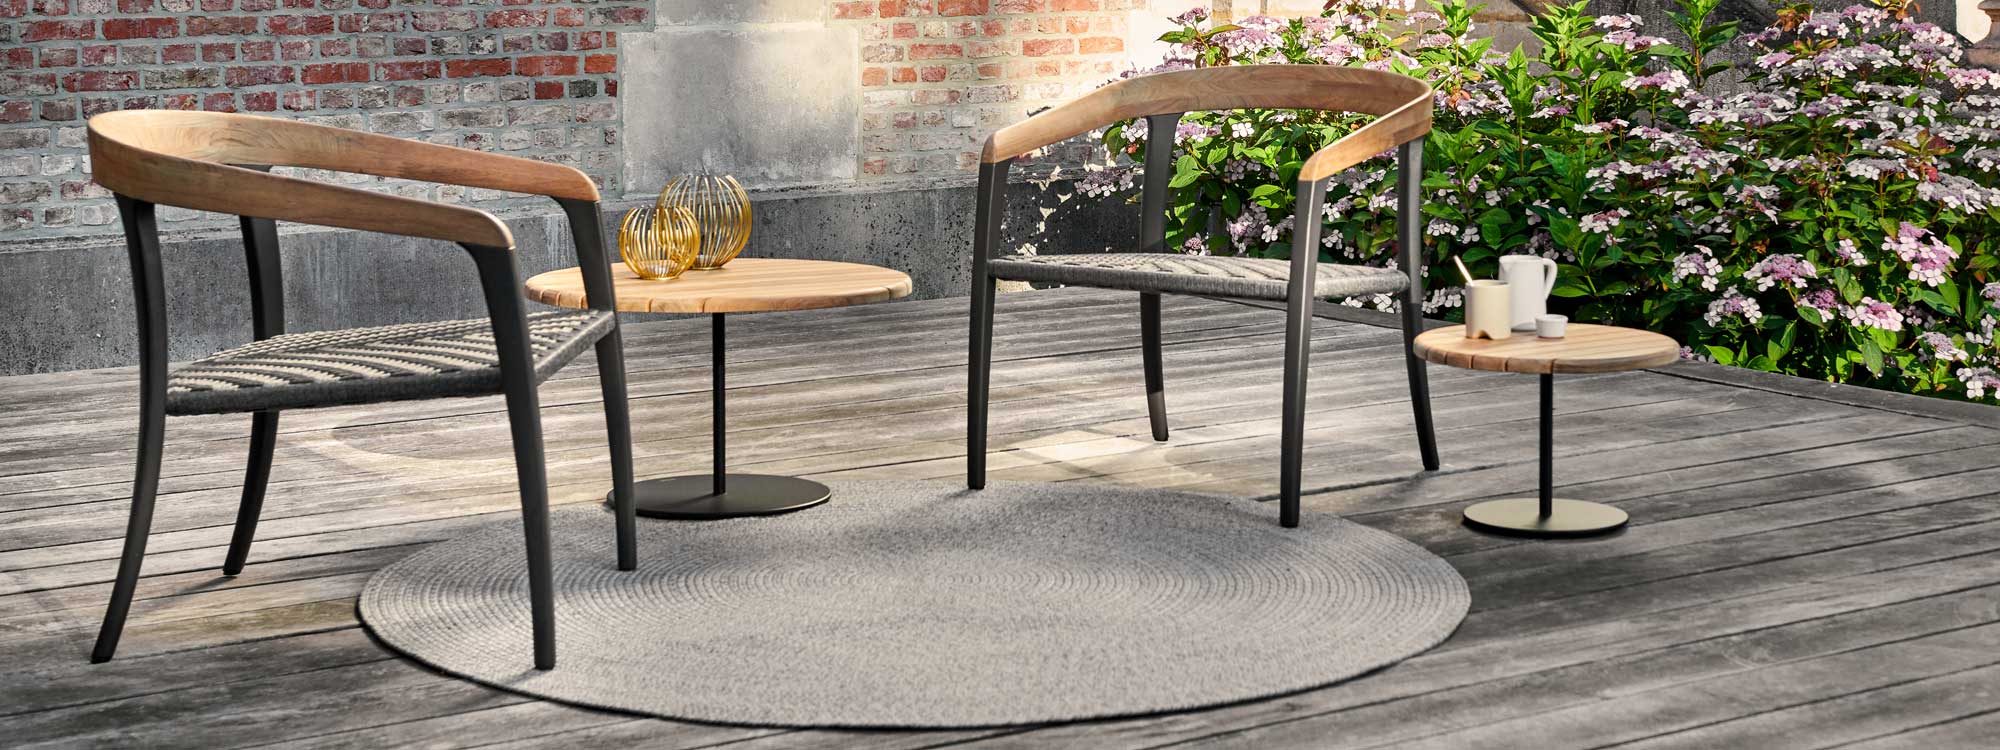 Butler outdoor side tables are modern garden low tables in high quality garden furniture materials by Royal Botania all-weather furniture